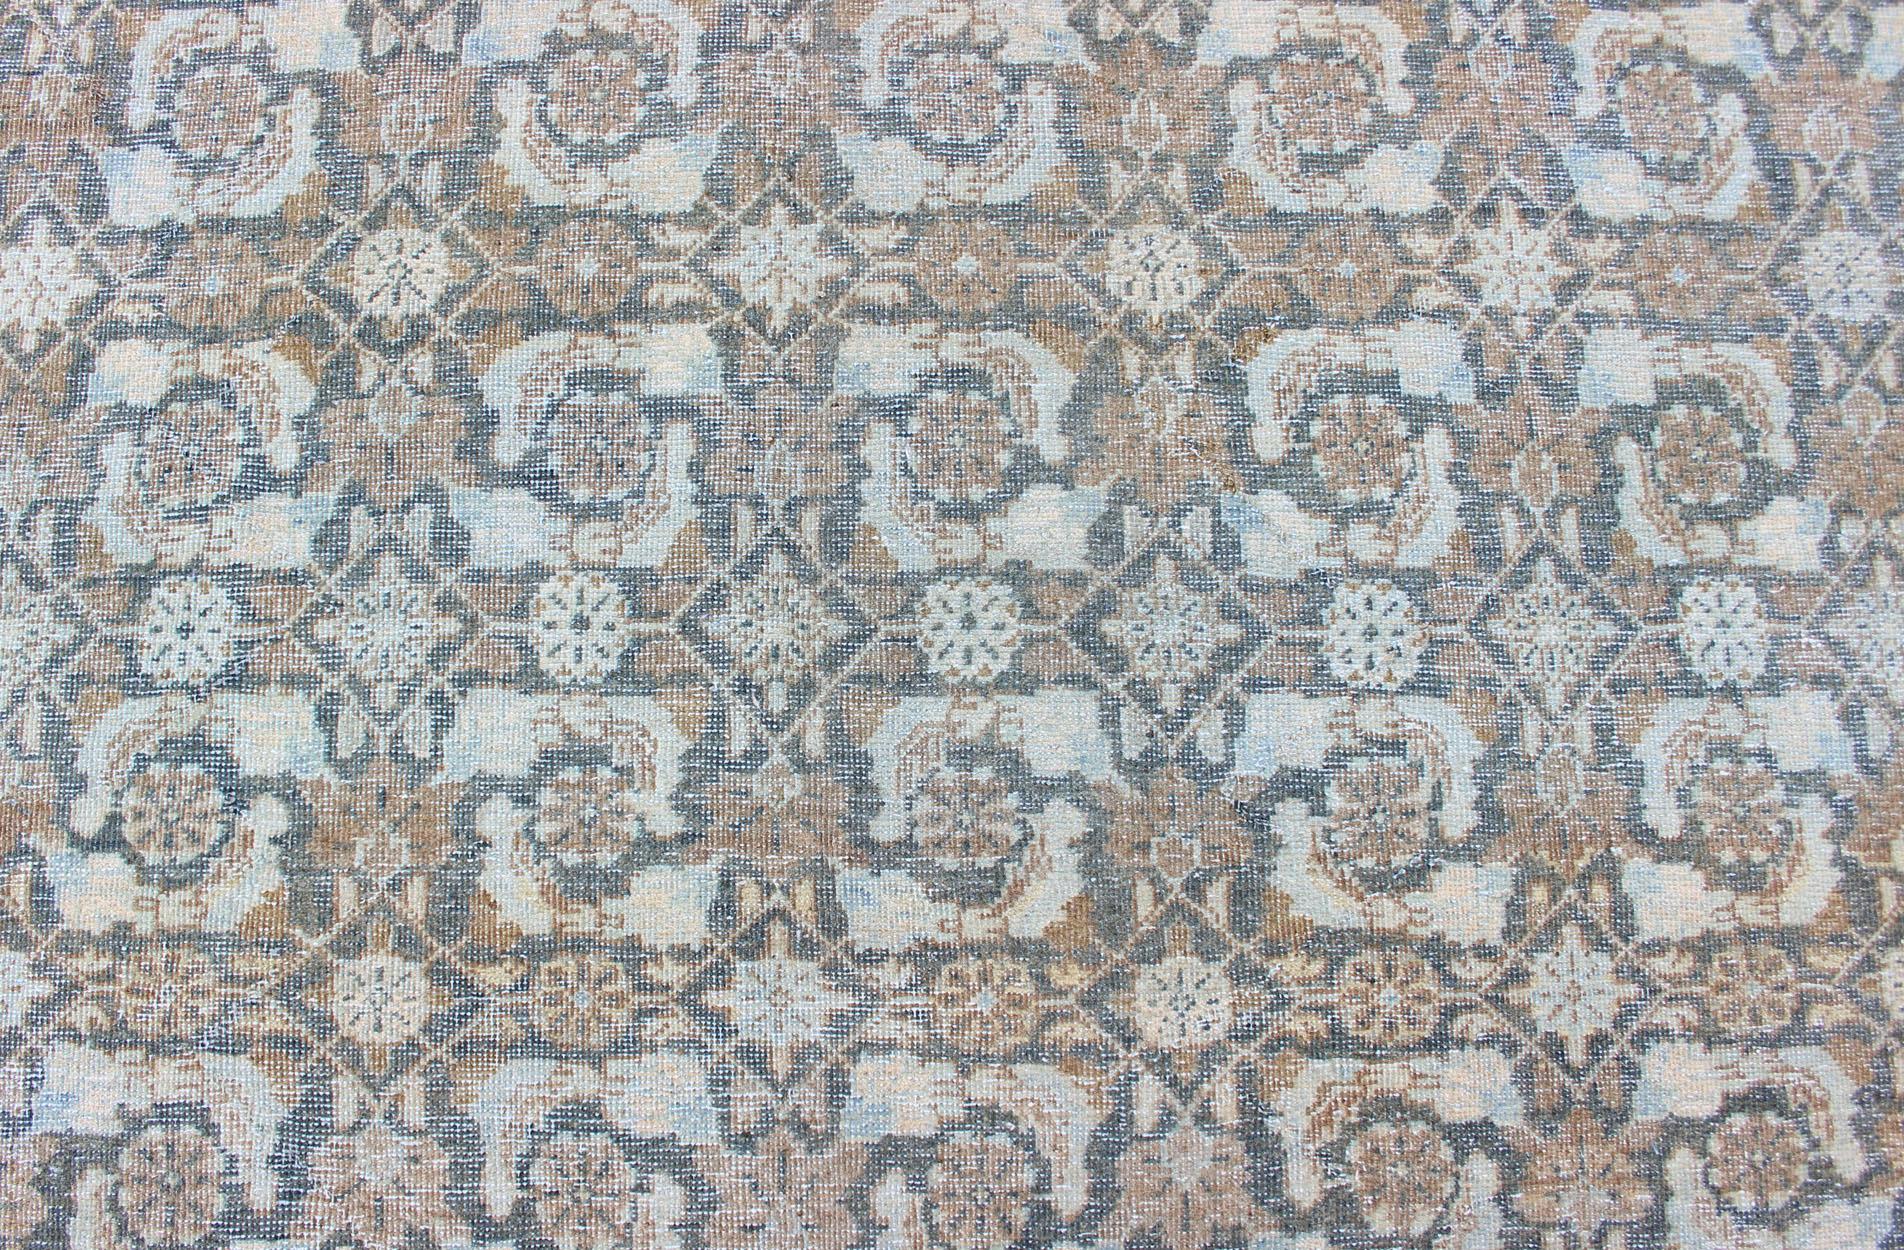 Antique Persian Sultanabad Distressed Rug in Blue, Blue Gray and Light Brown 4